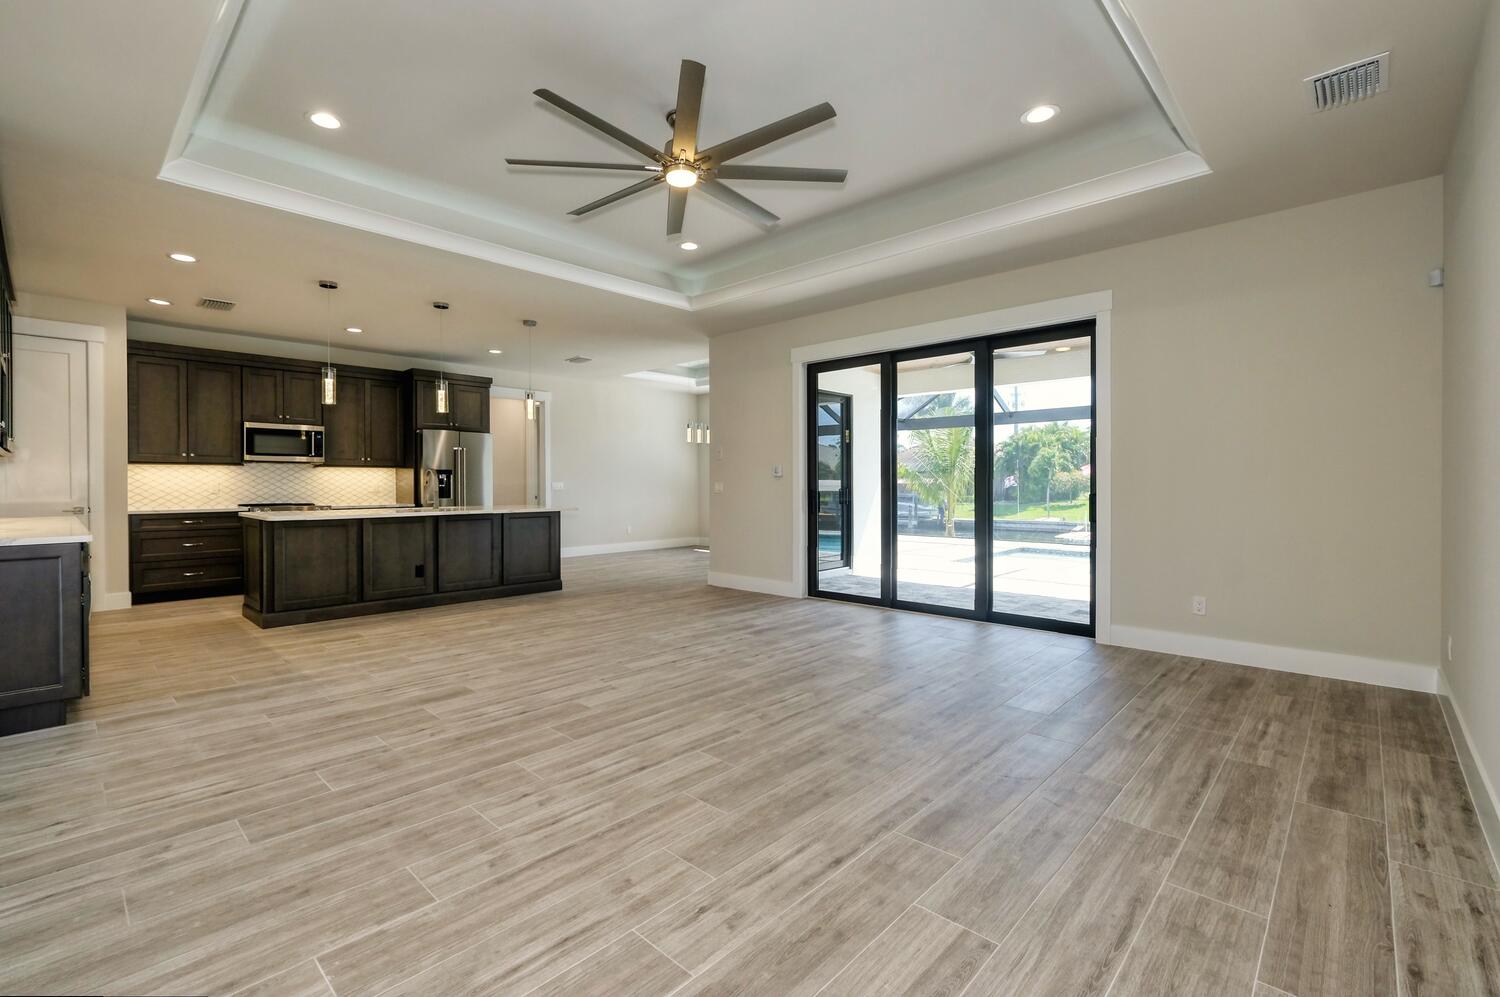 Picture of the living area of the model home Serenity